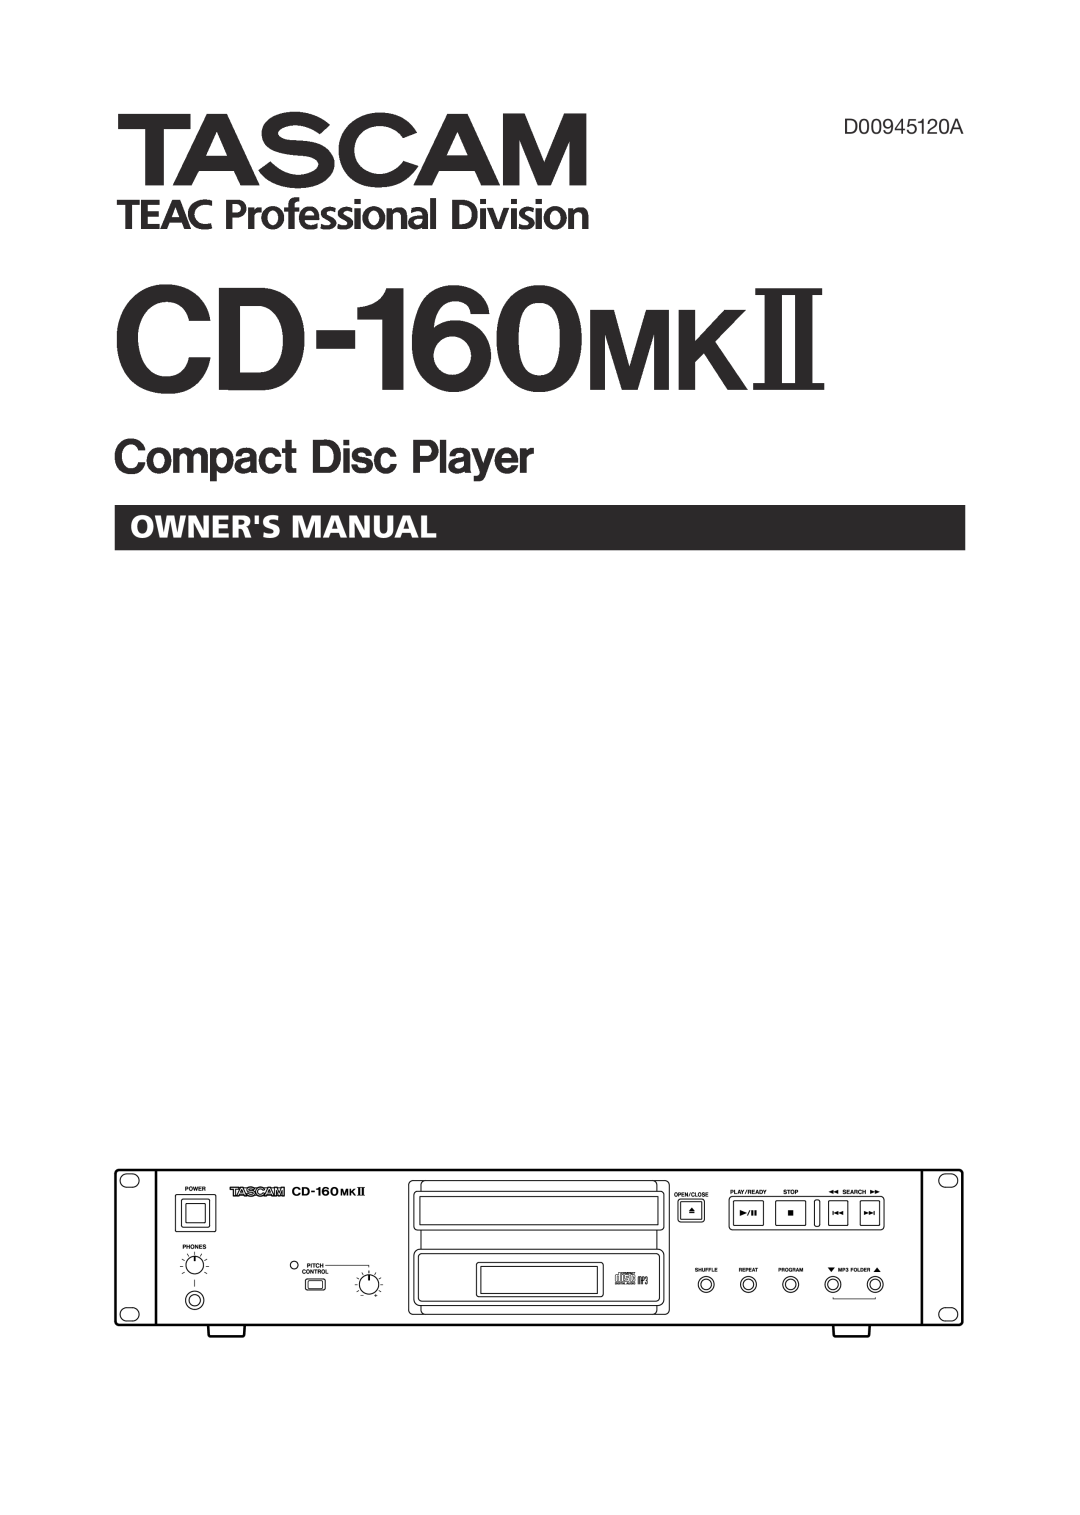 Tascam CD-160MKII specifications CD-160mkII, Msrp $ 